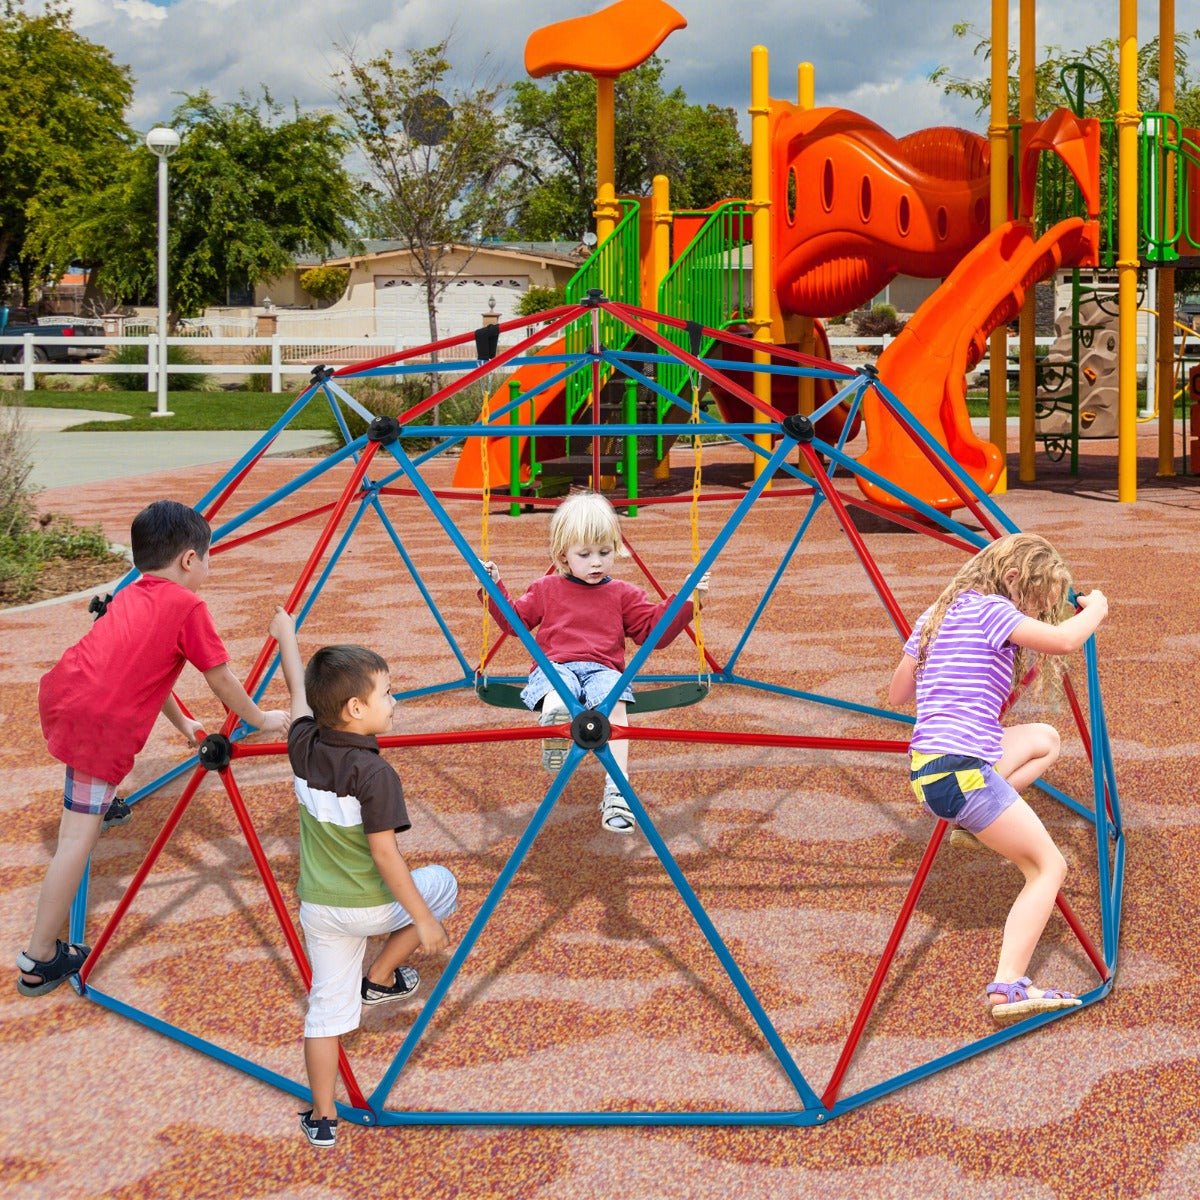 3m Geometric Dome Climber and Swing Set for Active Kids